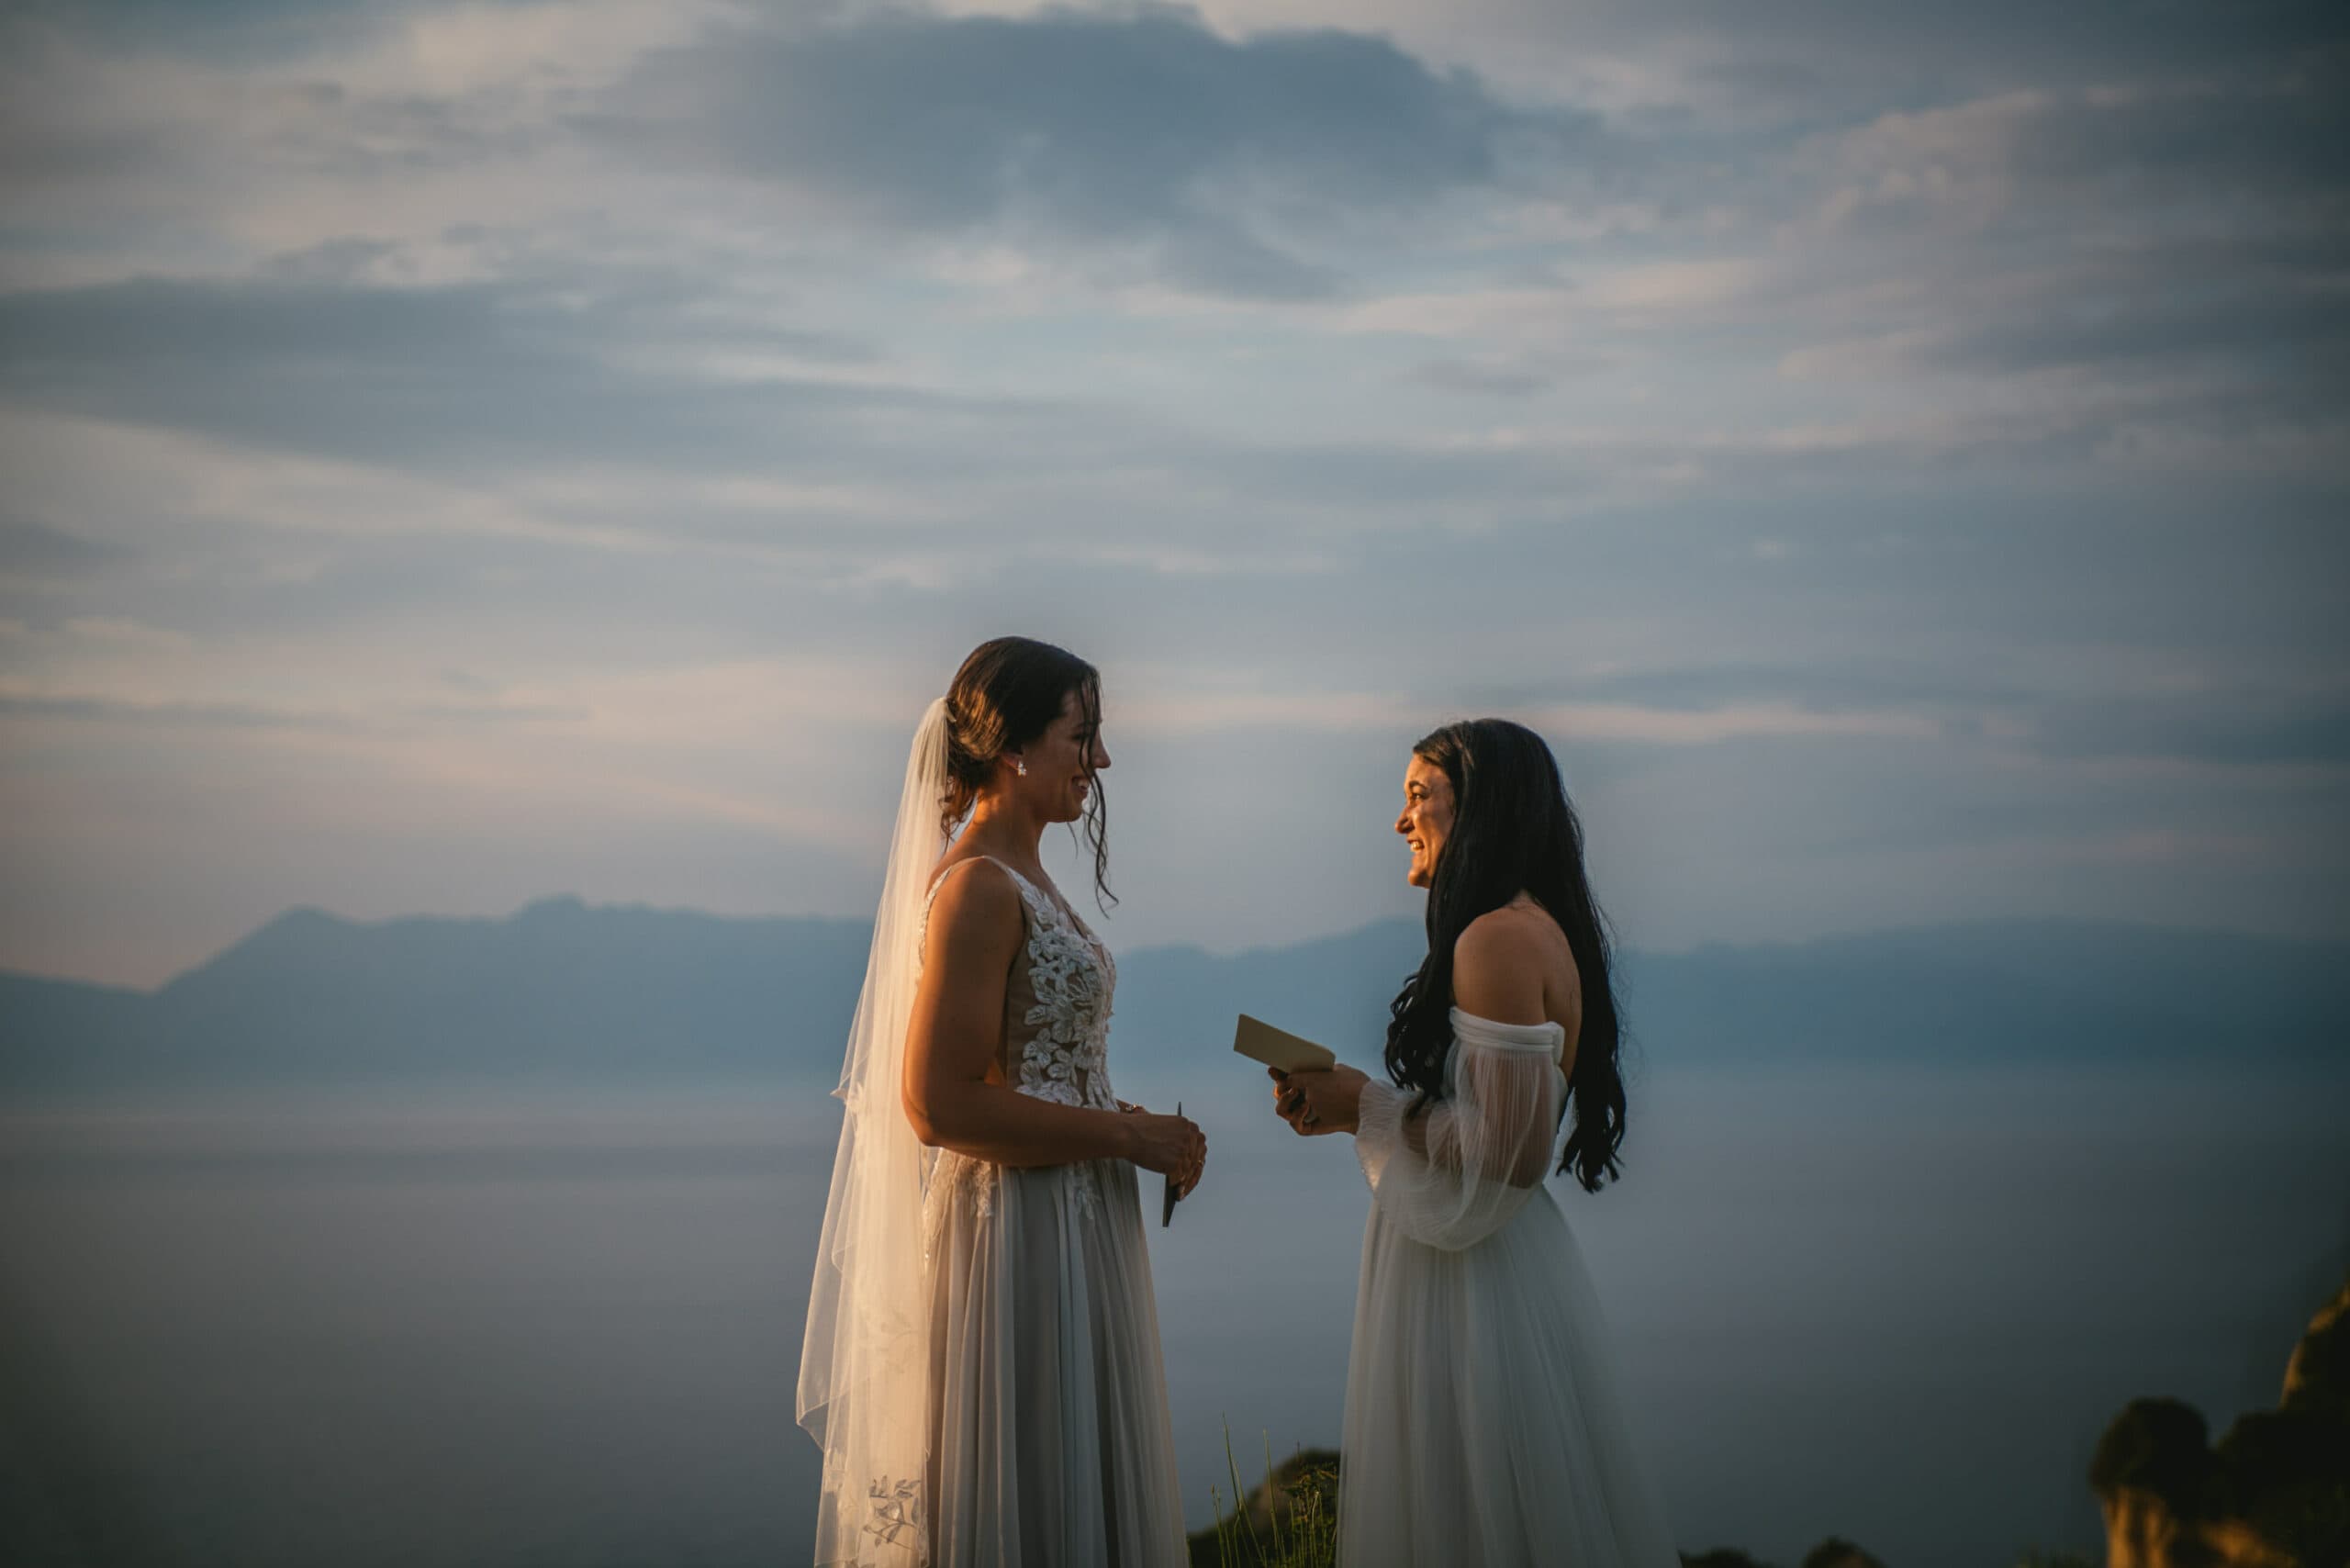 The couple's eyes locked in deep connection during their Corfu elopement ceremony.